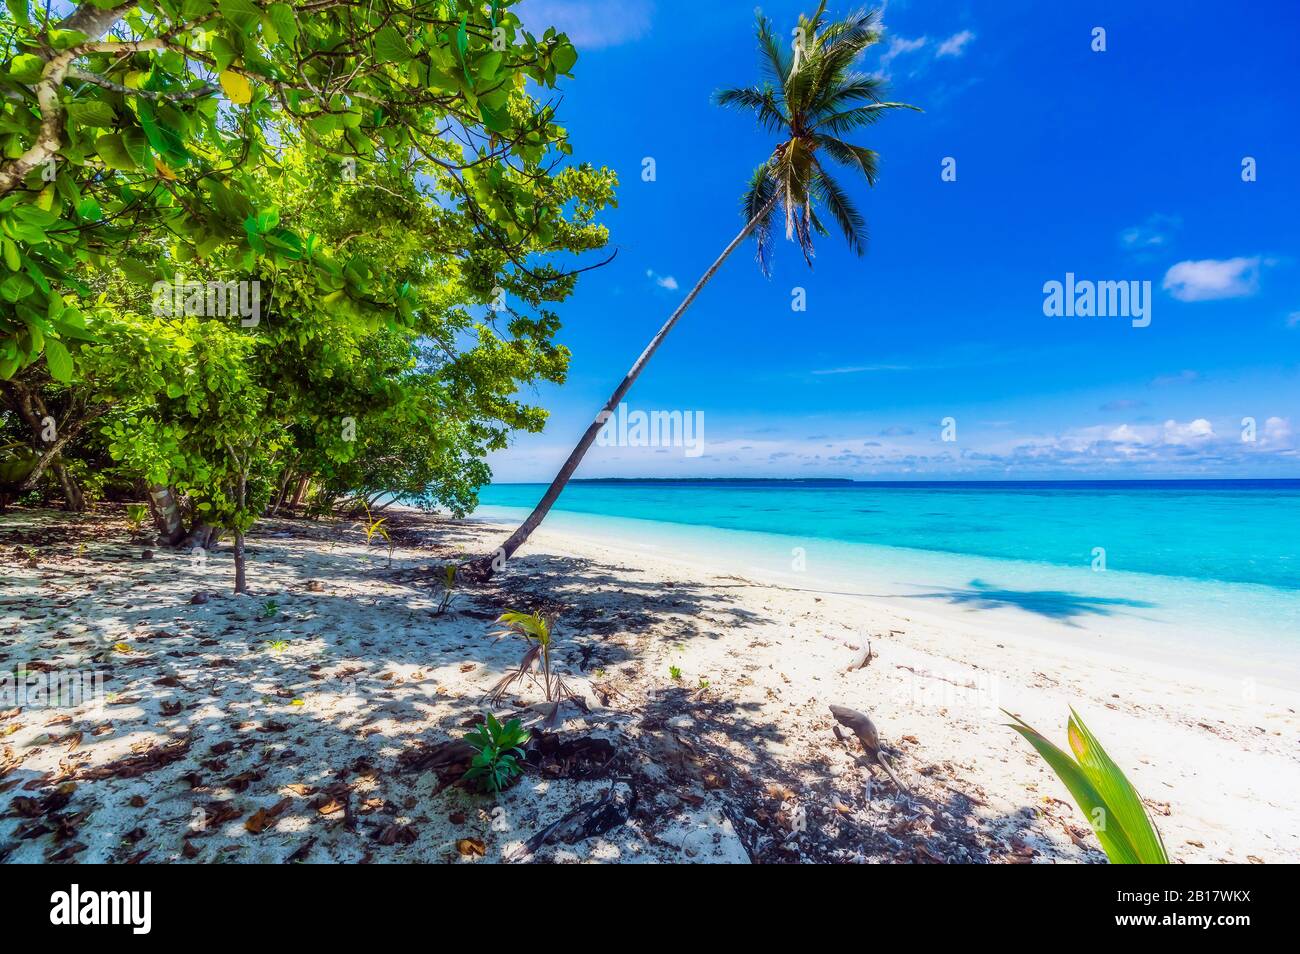 Milne Bay Province High Resolution Stock Photography and Images - Alamy